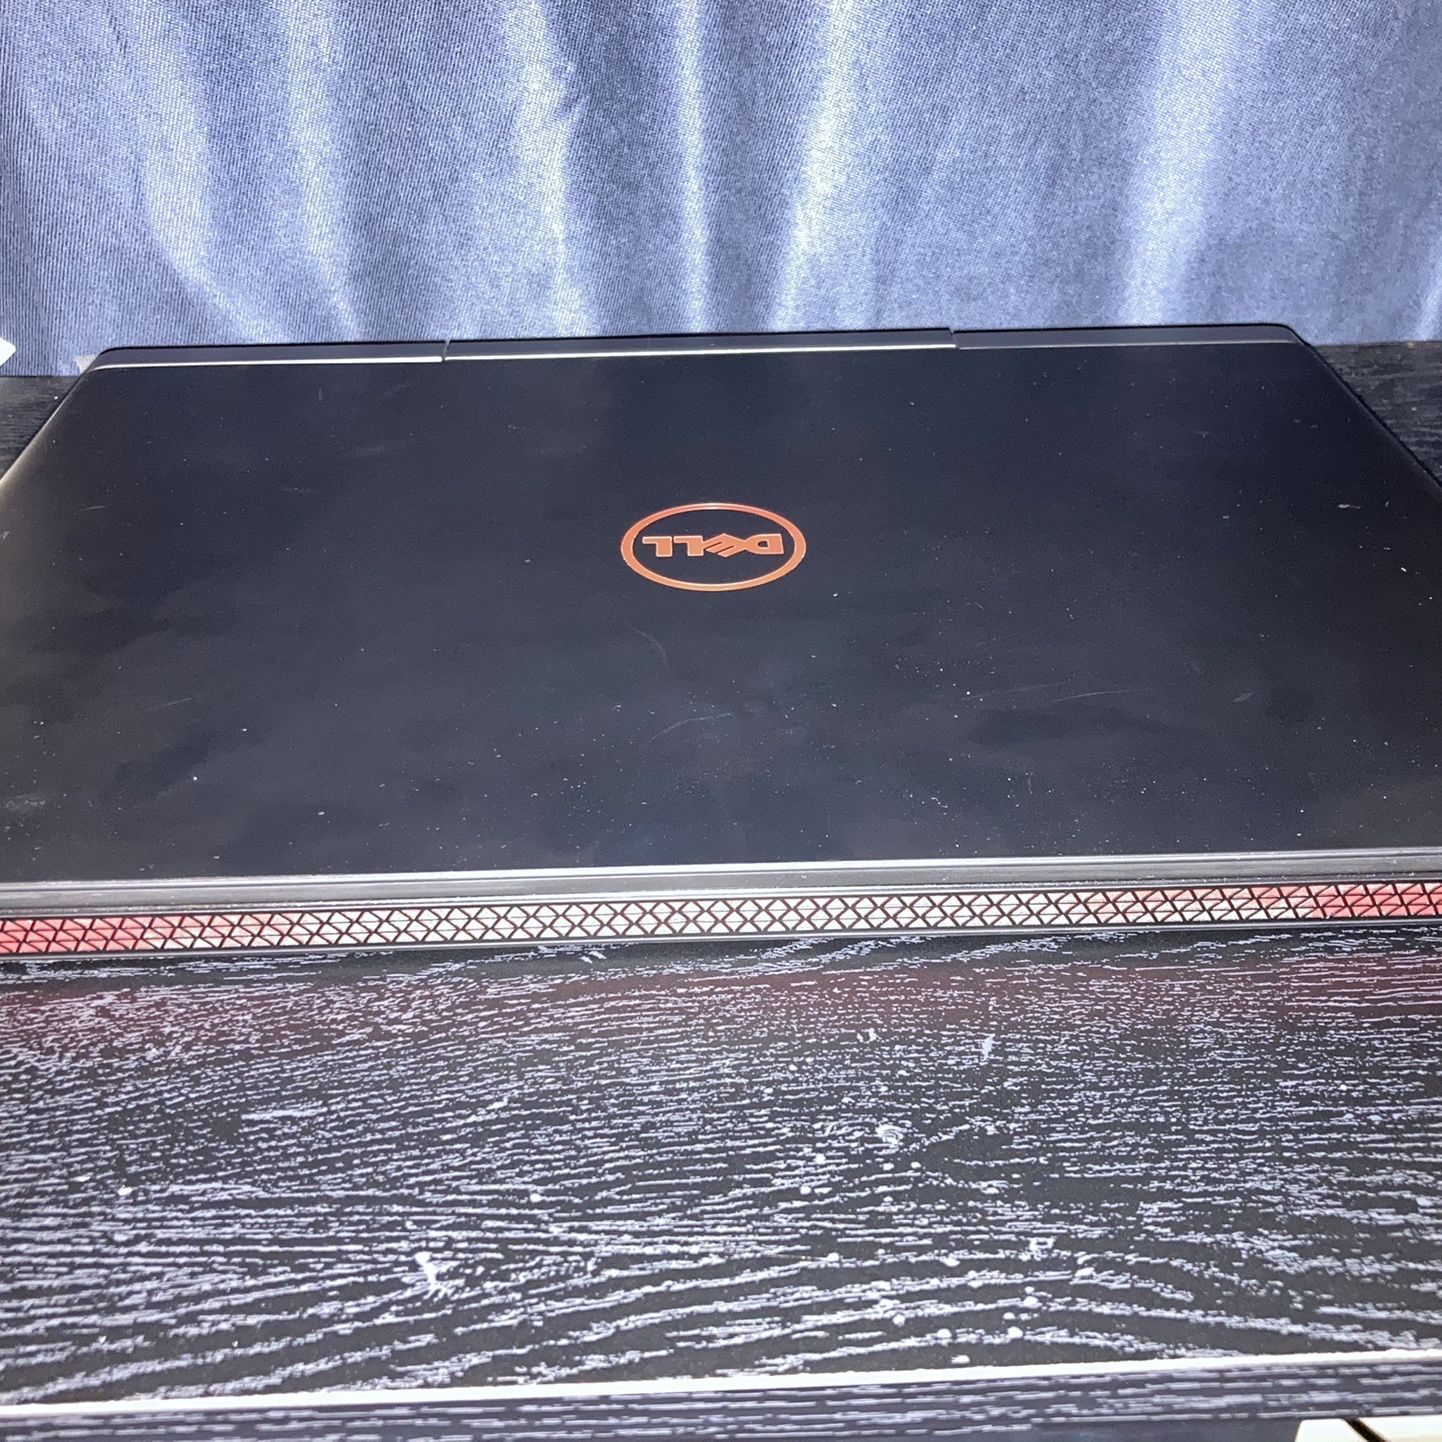 Dell gaming Laptop